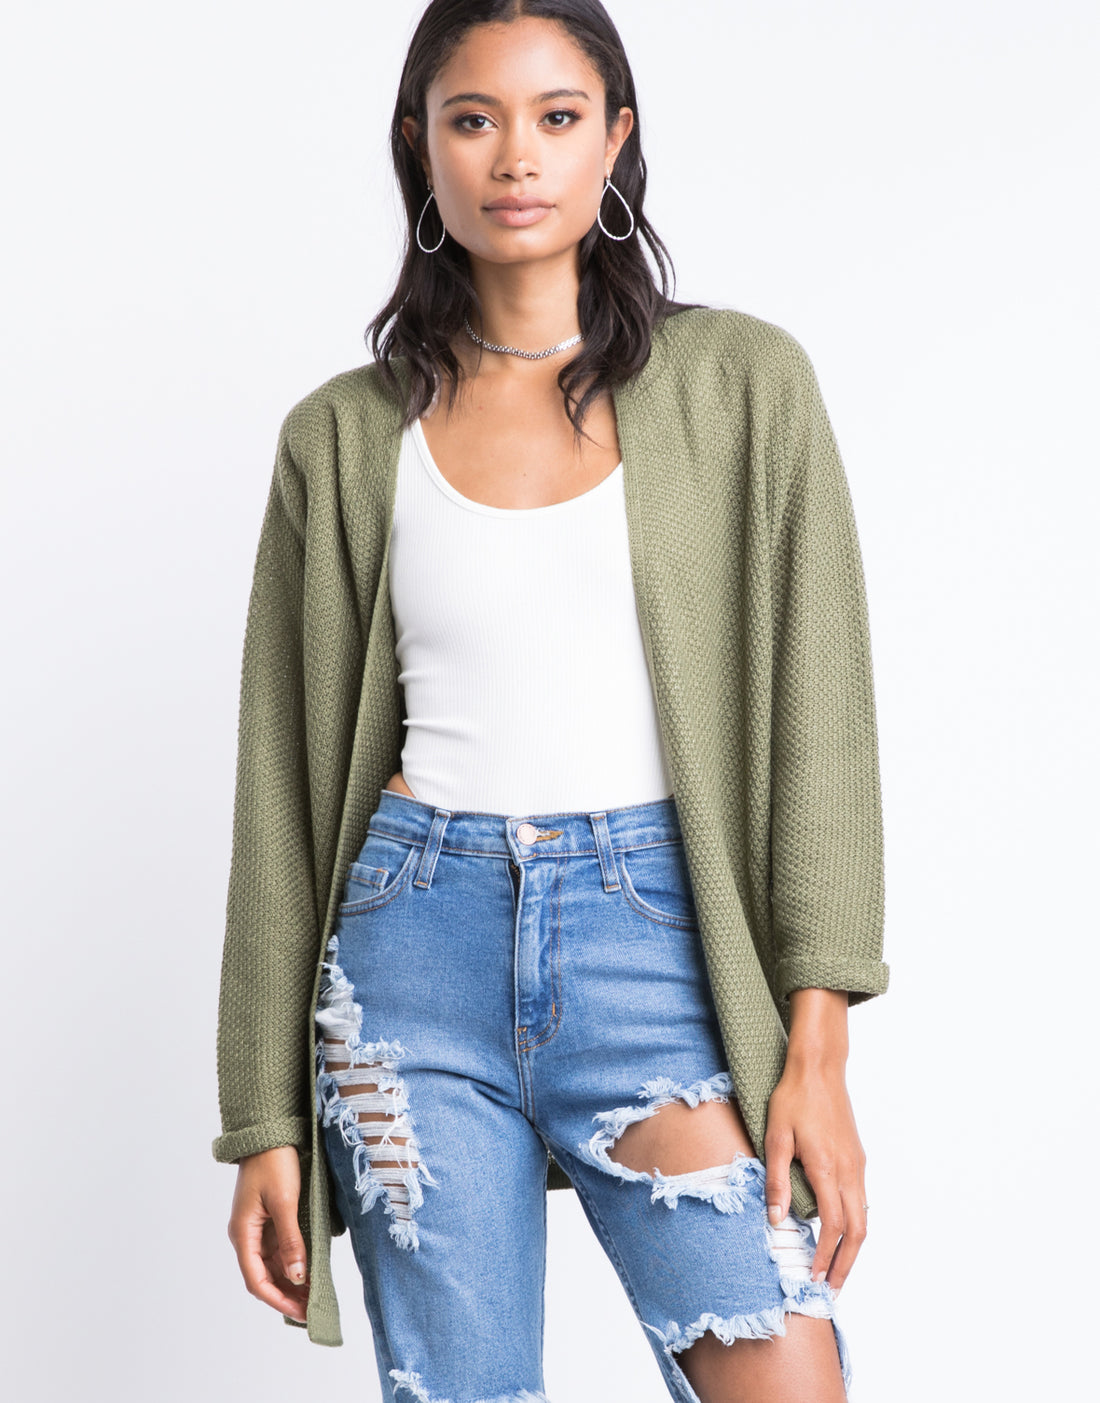 Textured Cuffed Sleeves Cardigan Outerwear Olive S/M -2020AVE